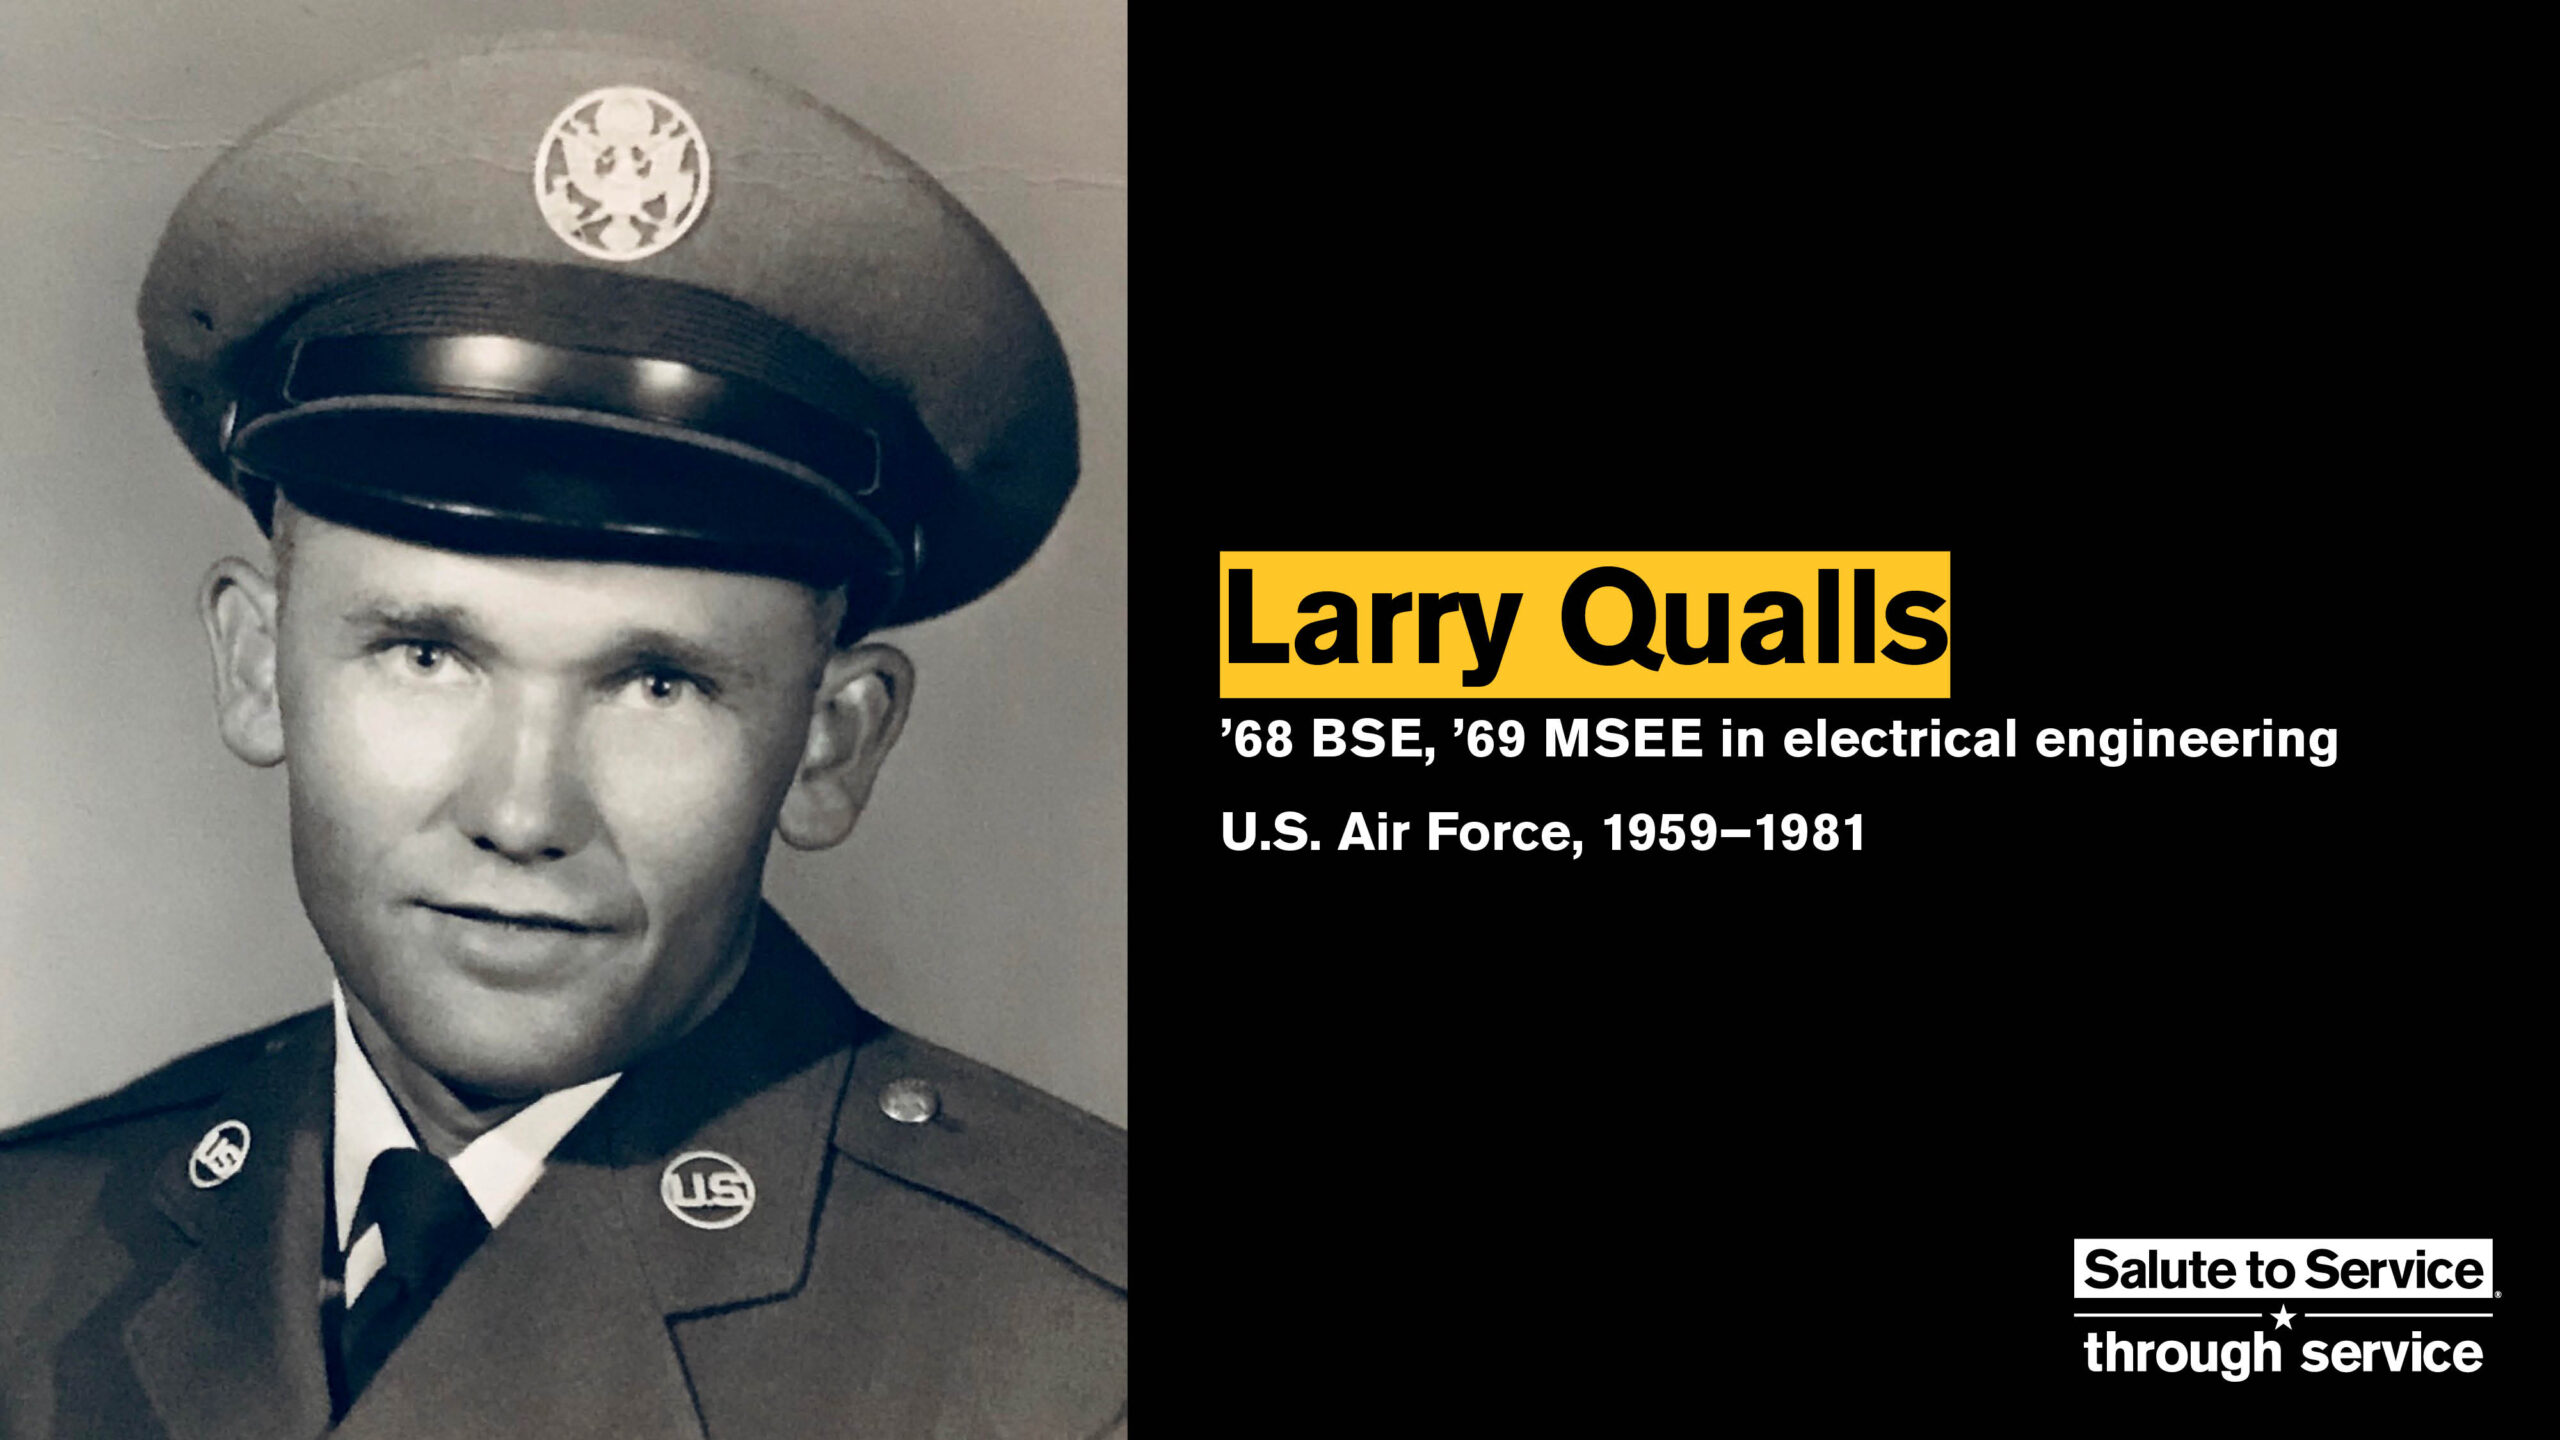 Salute to Service graphic with text that says Larry Qualls with a photo of him